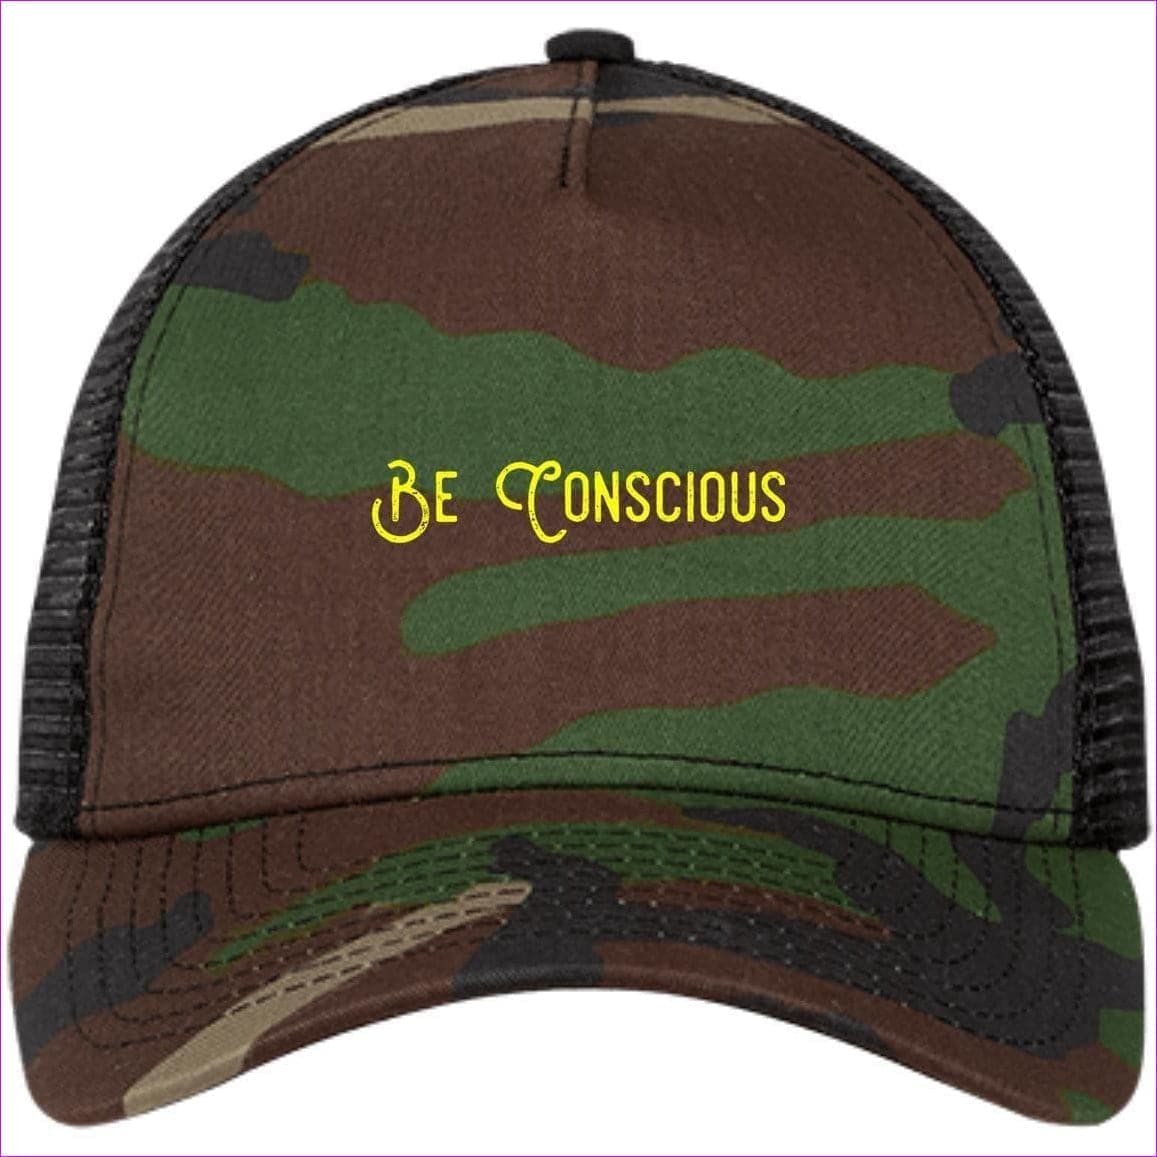 NE205 Snapback Trucker Cap Camo/Black One Size - Be Conscious Embroidered Knit Cap, Cap, Beanie - Beanie at TFC&H Co.